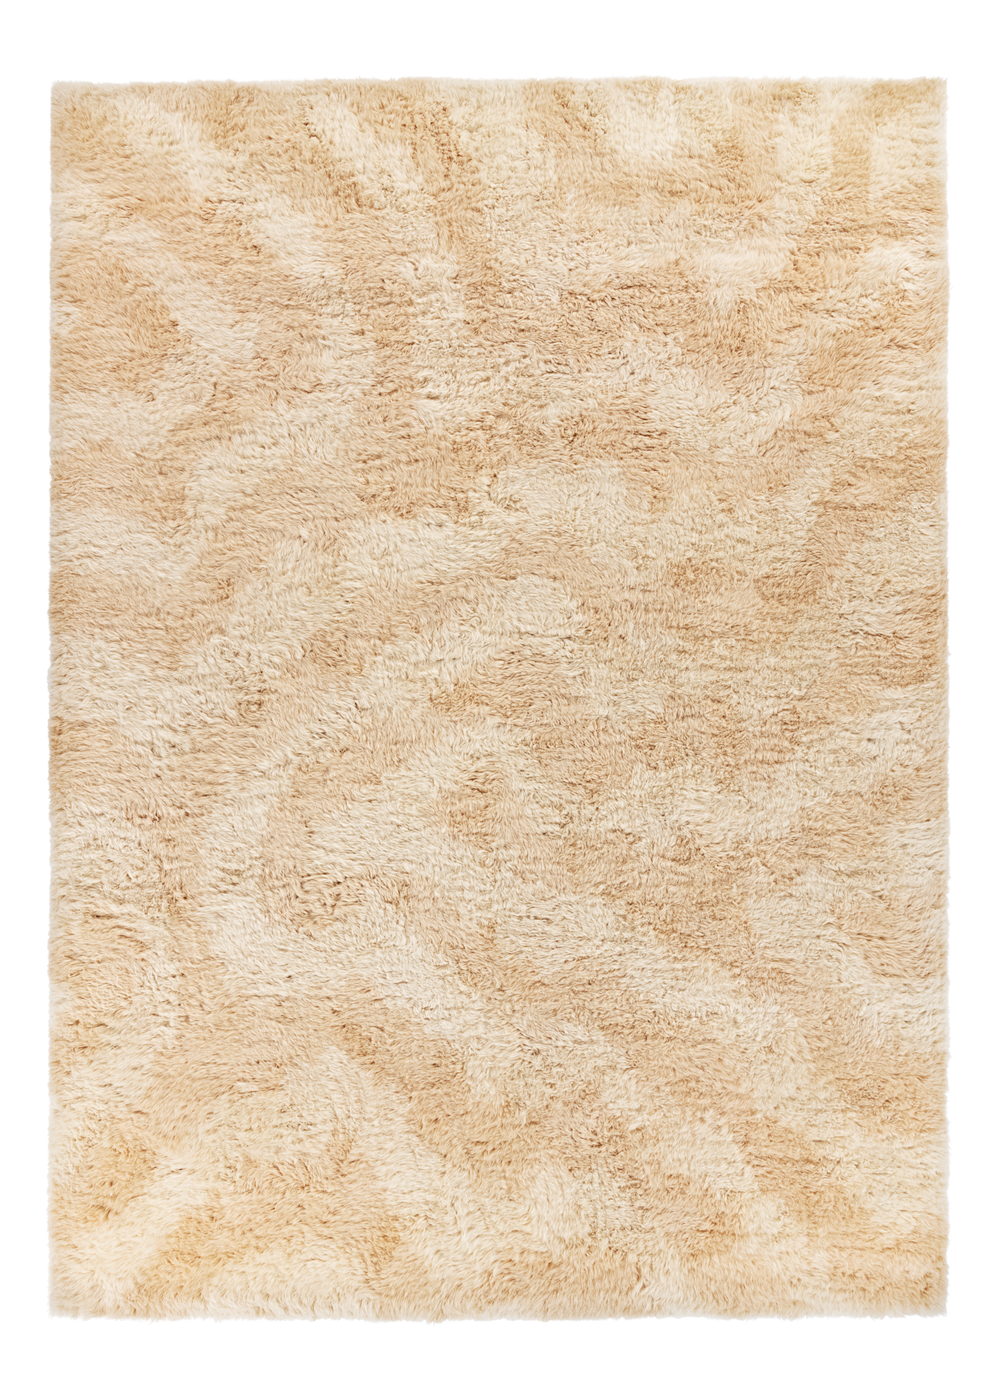 Beige and off white Monster rug by Hem